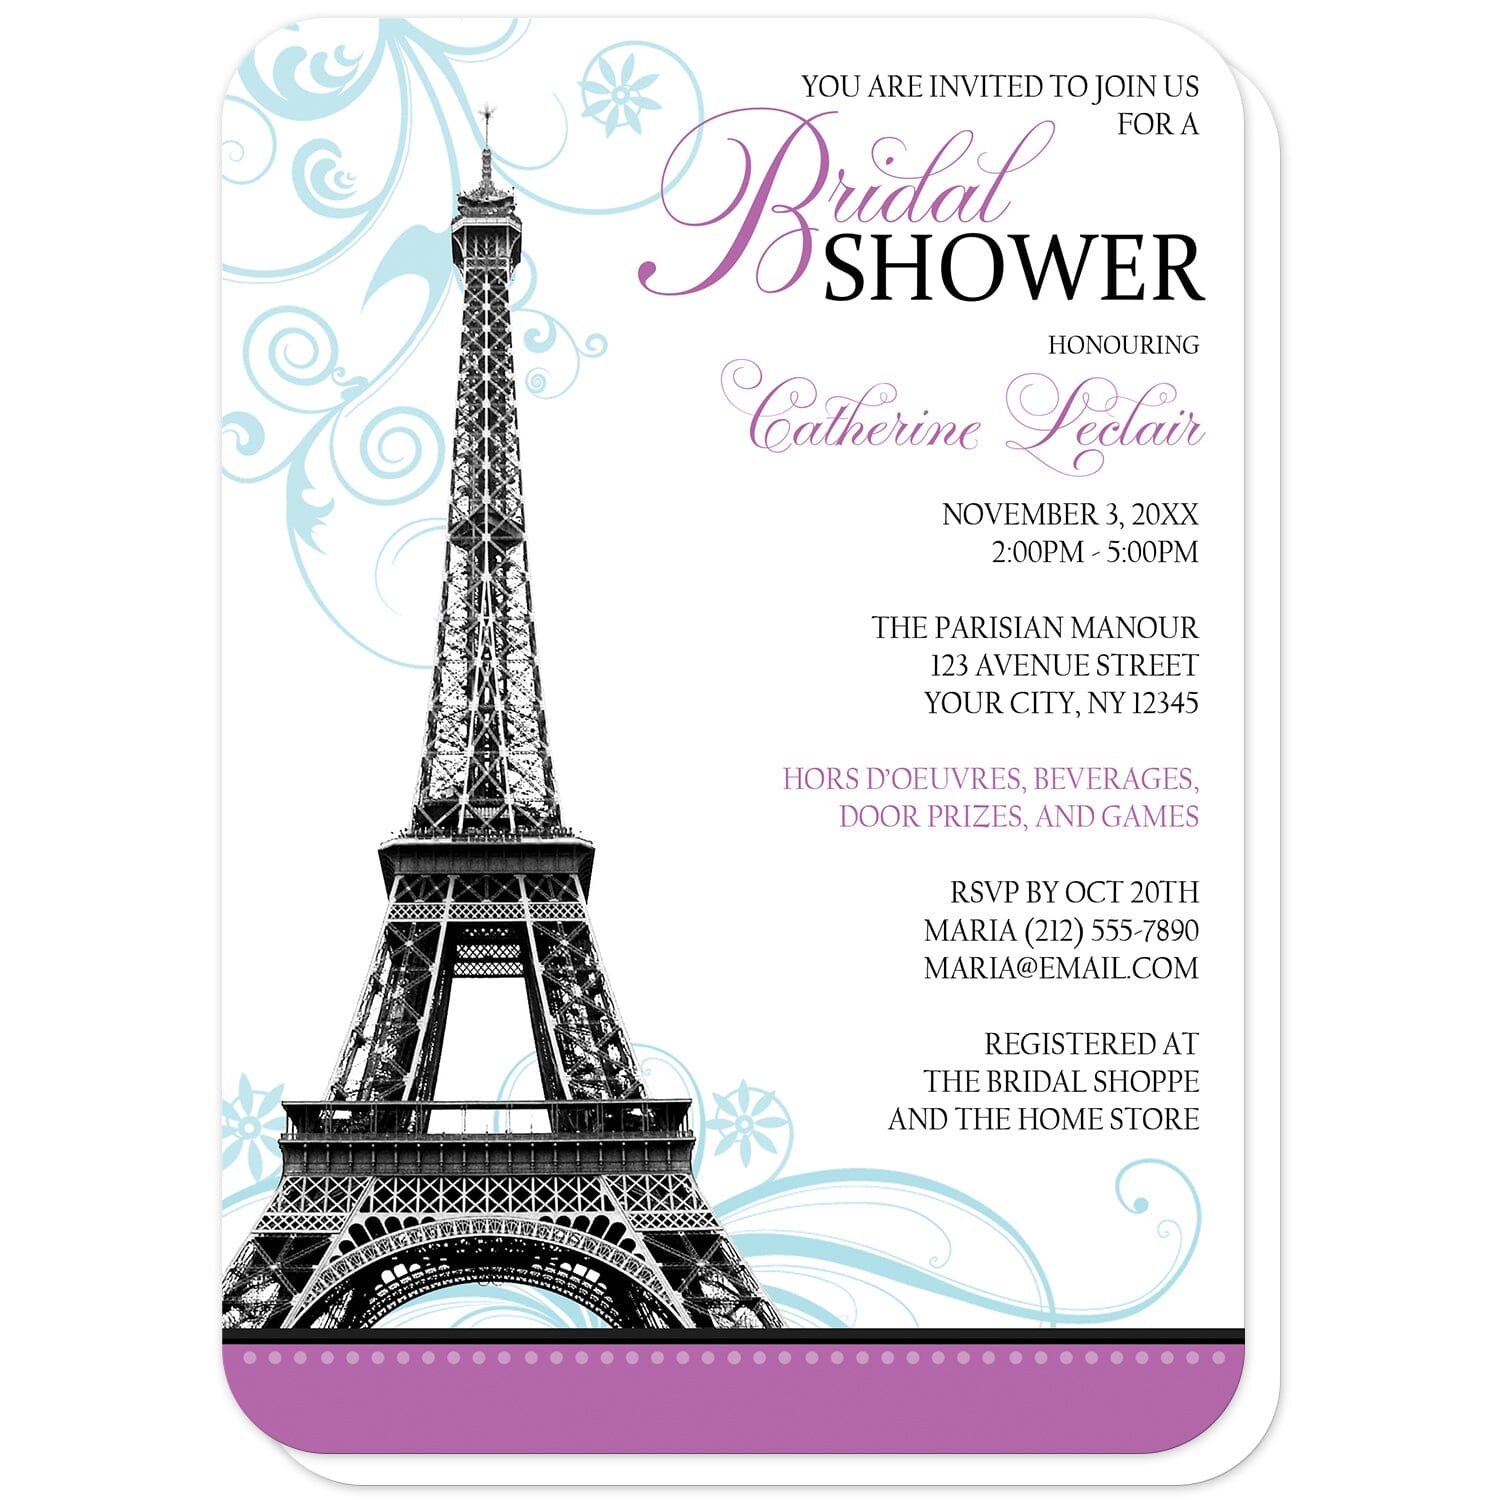 Modern Eiffel Tower Purple Parisian Bridal Shower Invitations (with rounded corners) at Artistically Invited. Modern Eiffel Tower purple Parisian bridal shower invitations with a monochromatic illustration of the Eiffel Tower with light blue flourishes behind it and a purple stripe along the bottom. Your personalized bridal shower celebration details are custom printed in black and purple along the right side. 